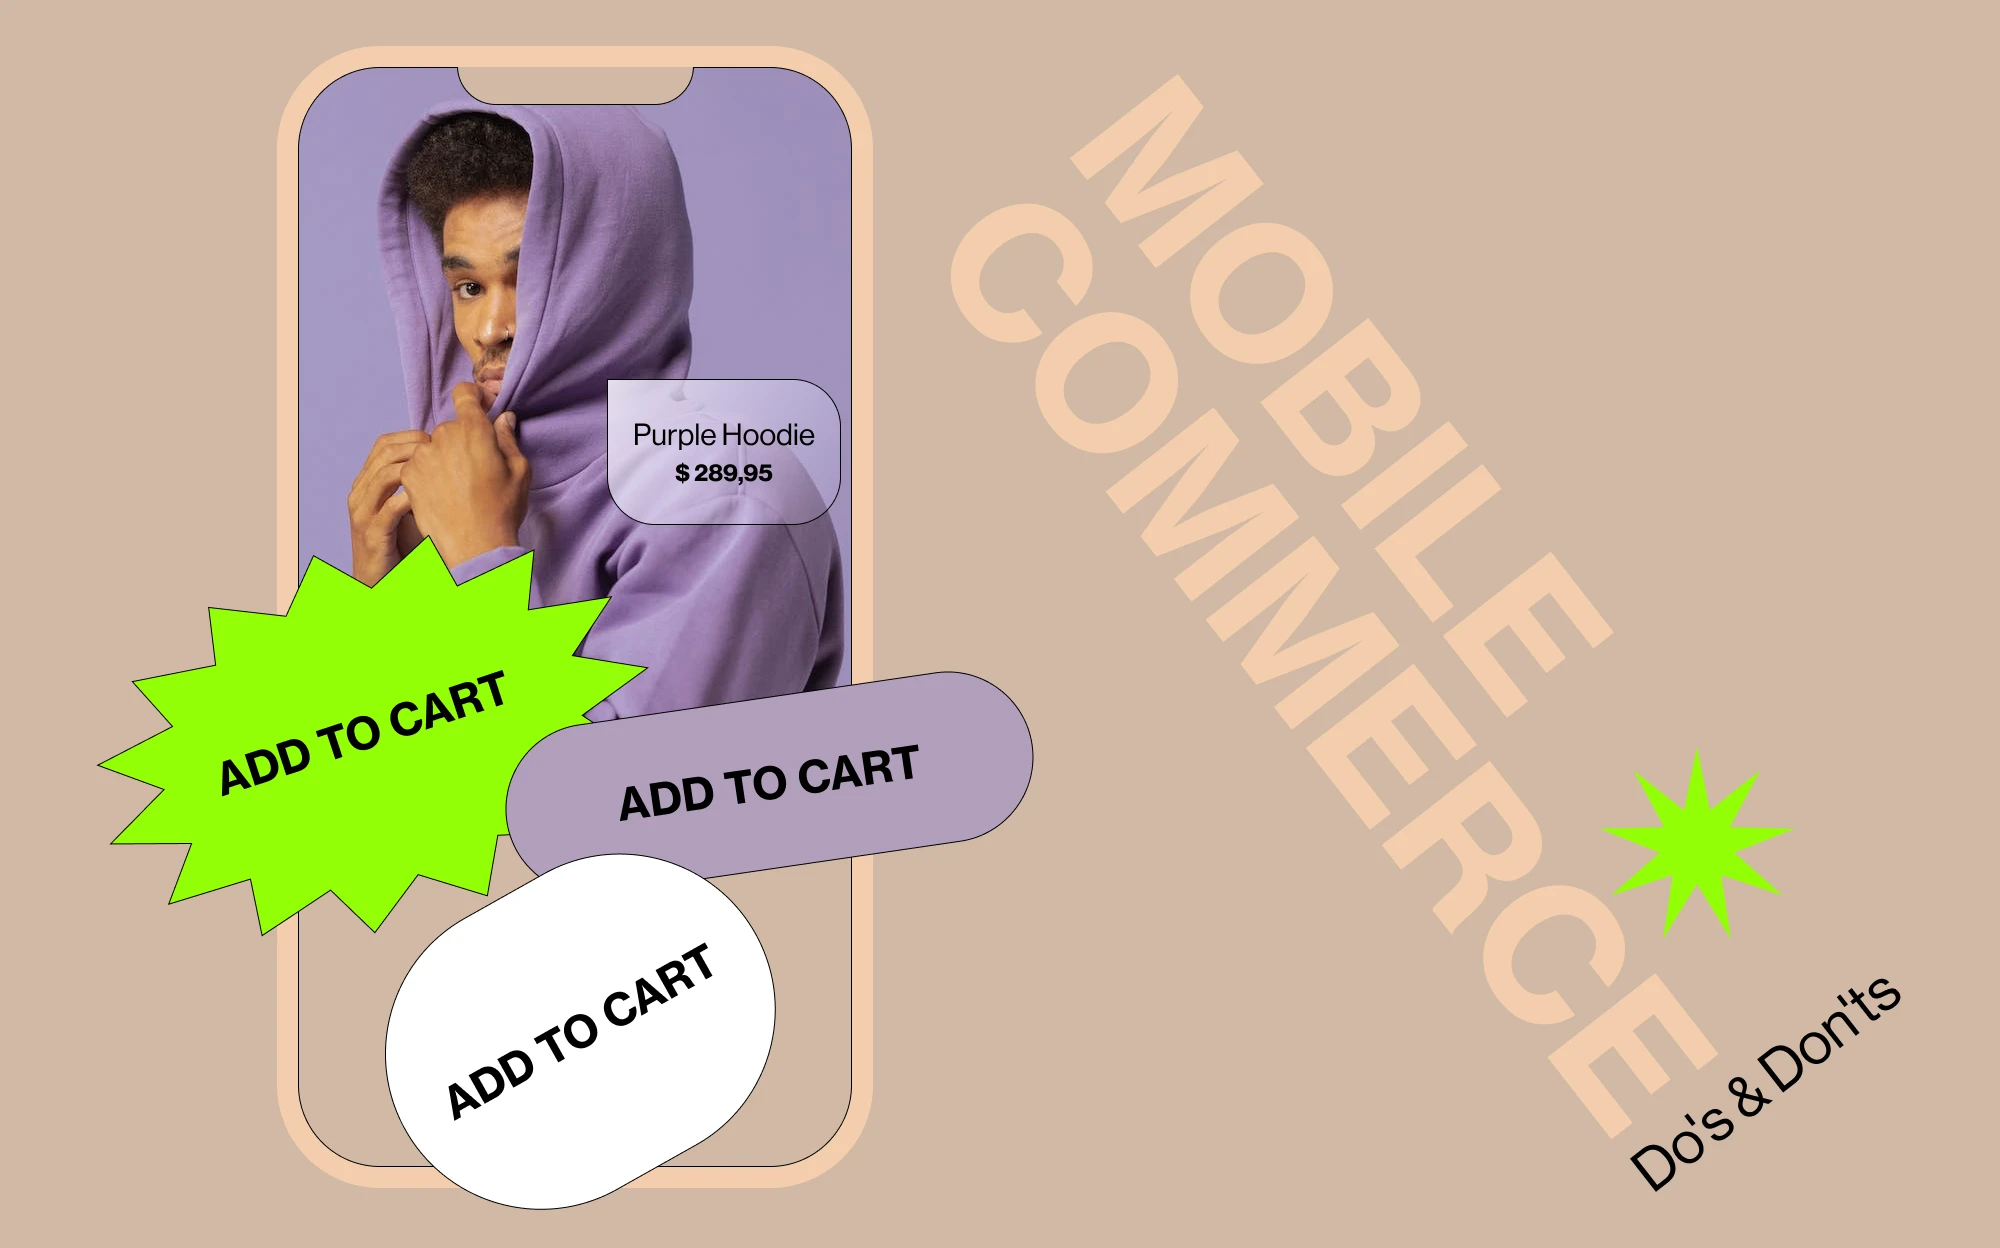 Mobile Commerce for Global Retailers: Do's and Don'ts